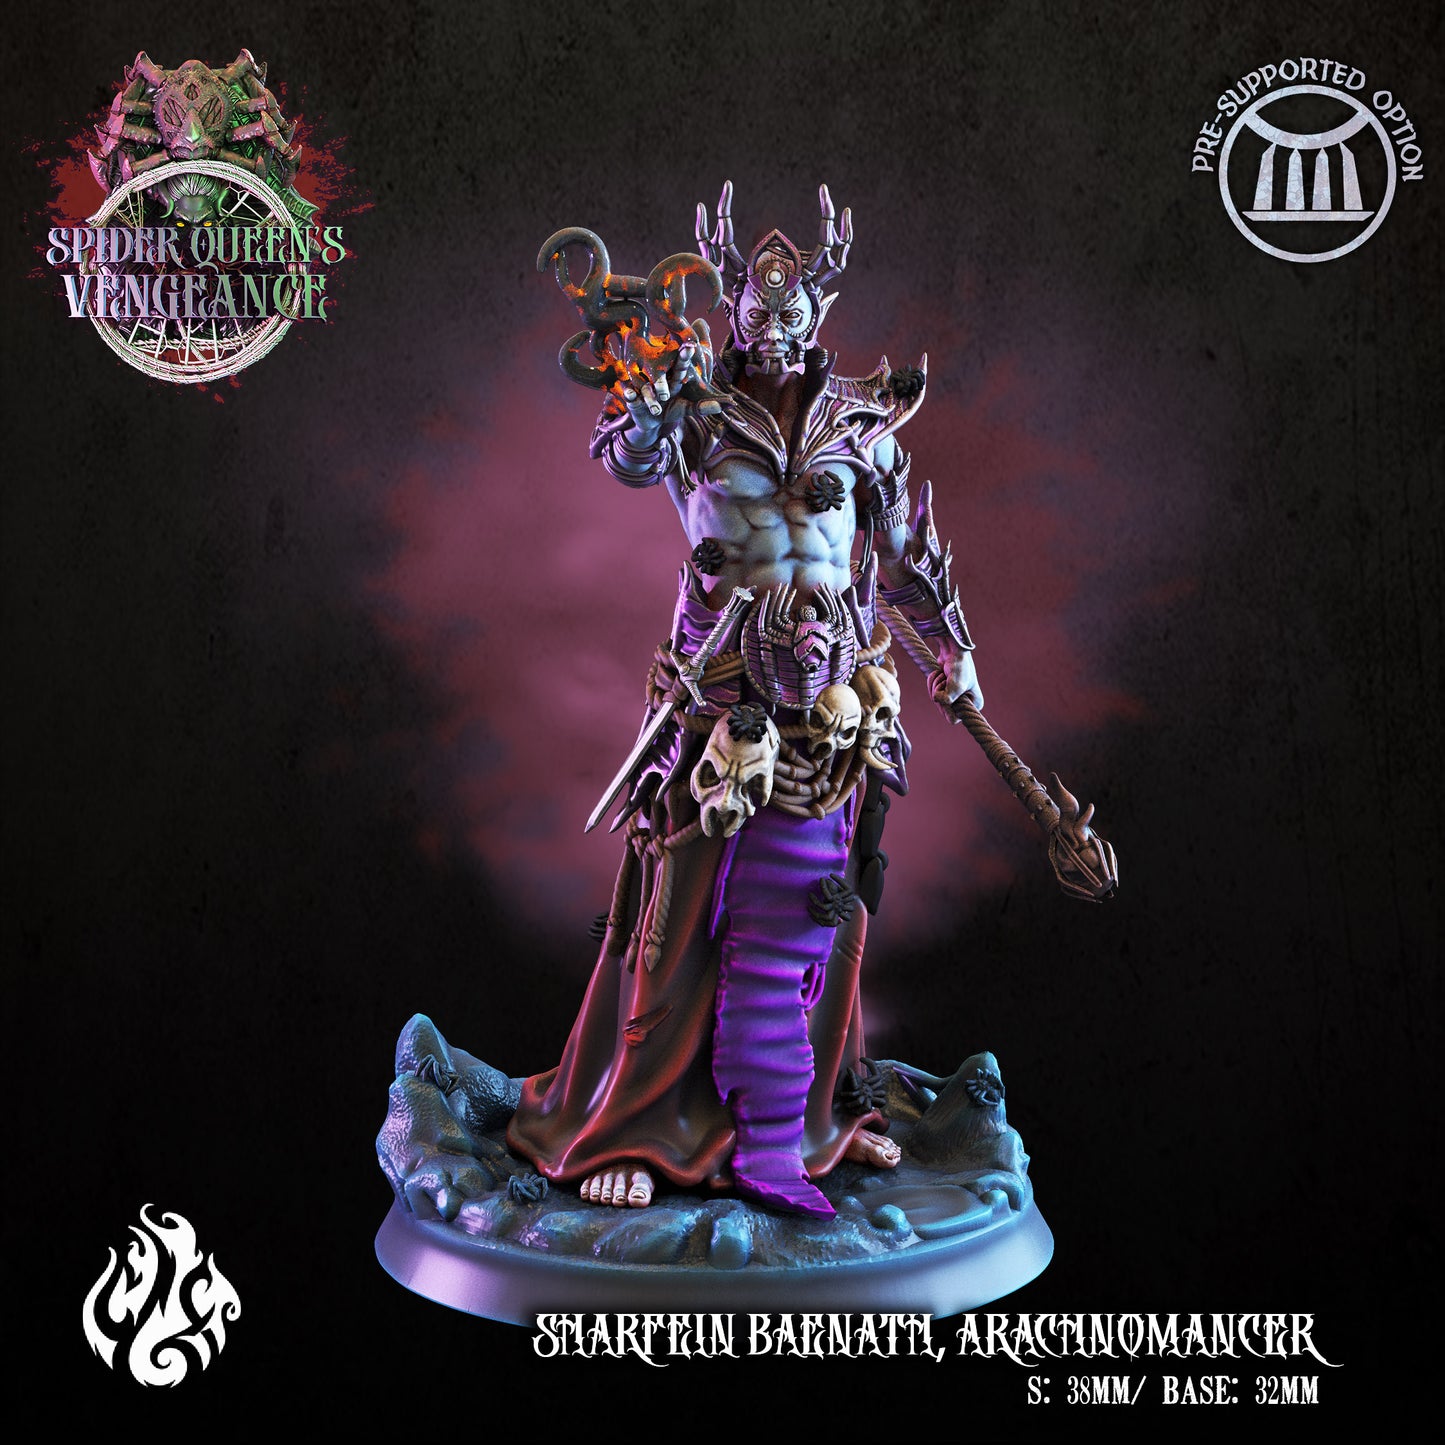 Sharfein Baenath, Arachnomancer the Spider Queen Spider Queen's Vengeance Series from Crippled God Foundry - Table-top gaming mini and collectable for painting.